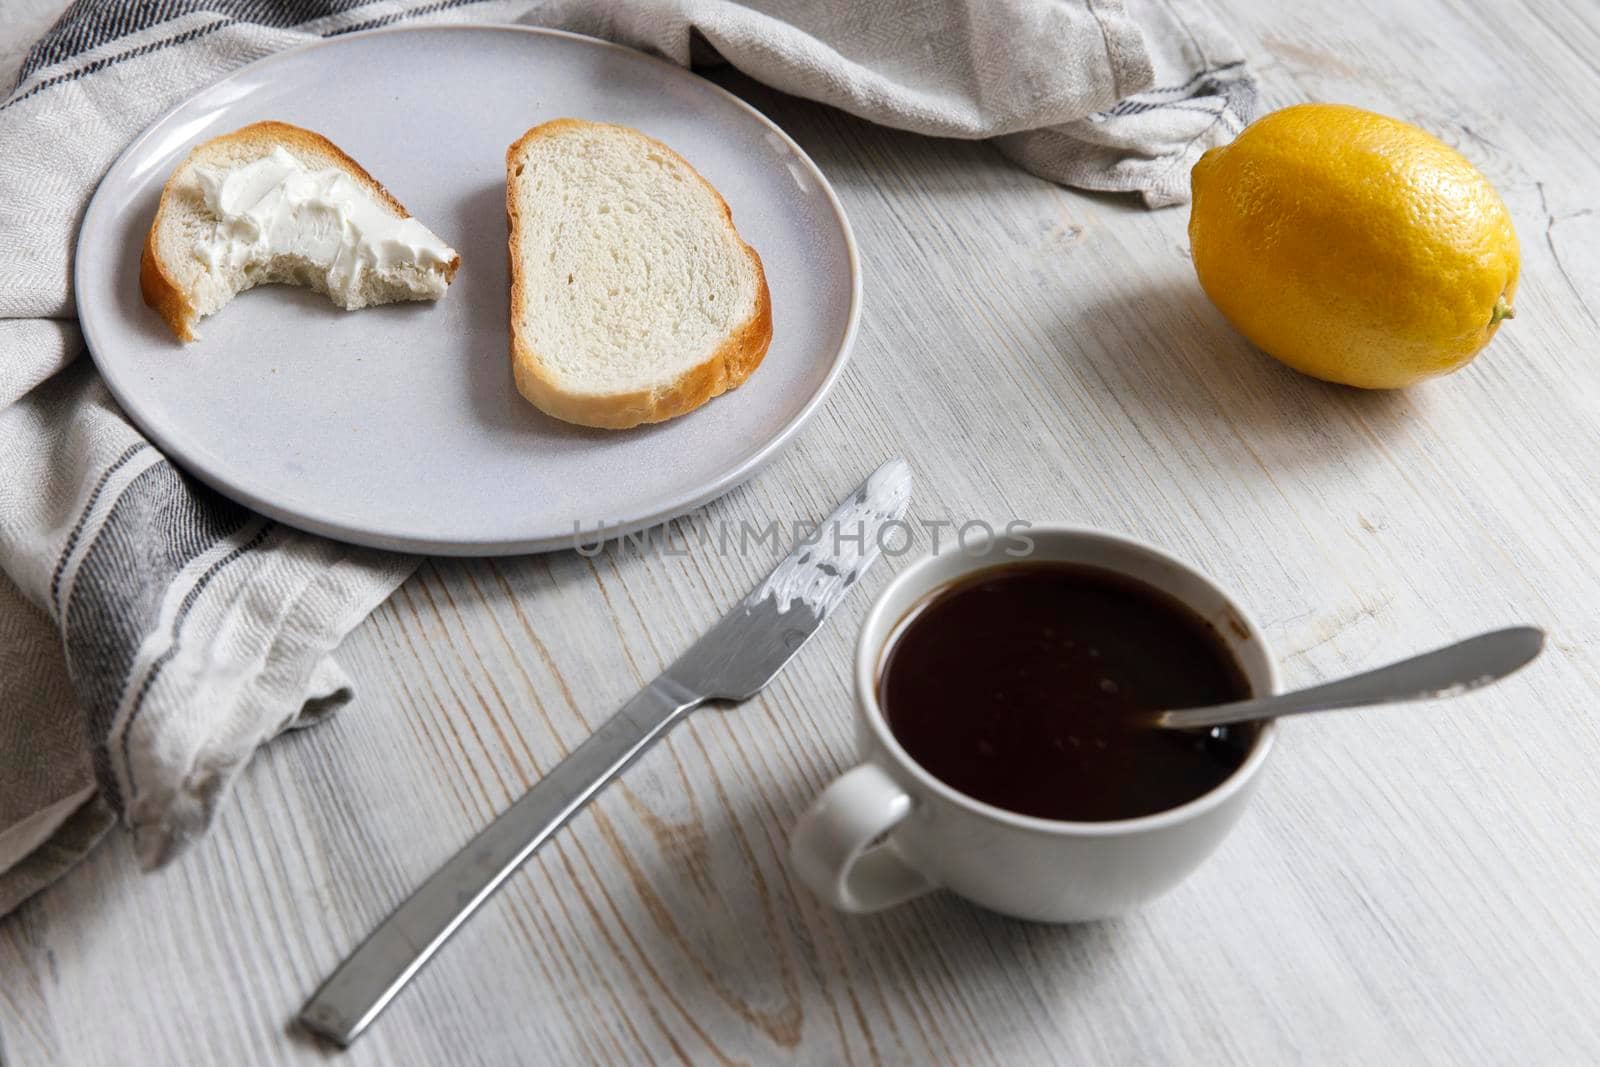 A cup of coffee, two pieces of sugar, a lemon, a piece of bread with curd cheese spread on it on a white ceramic plate with a knife on the table. by elenarostunova